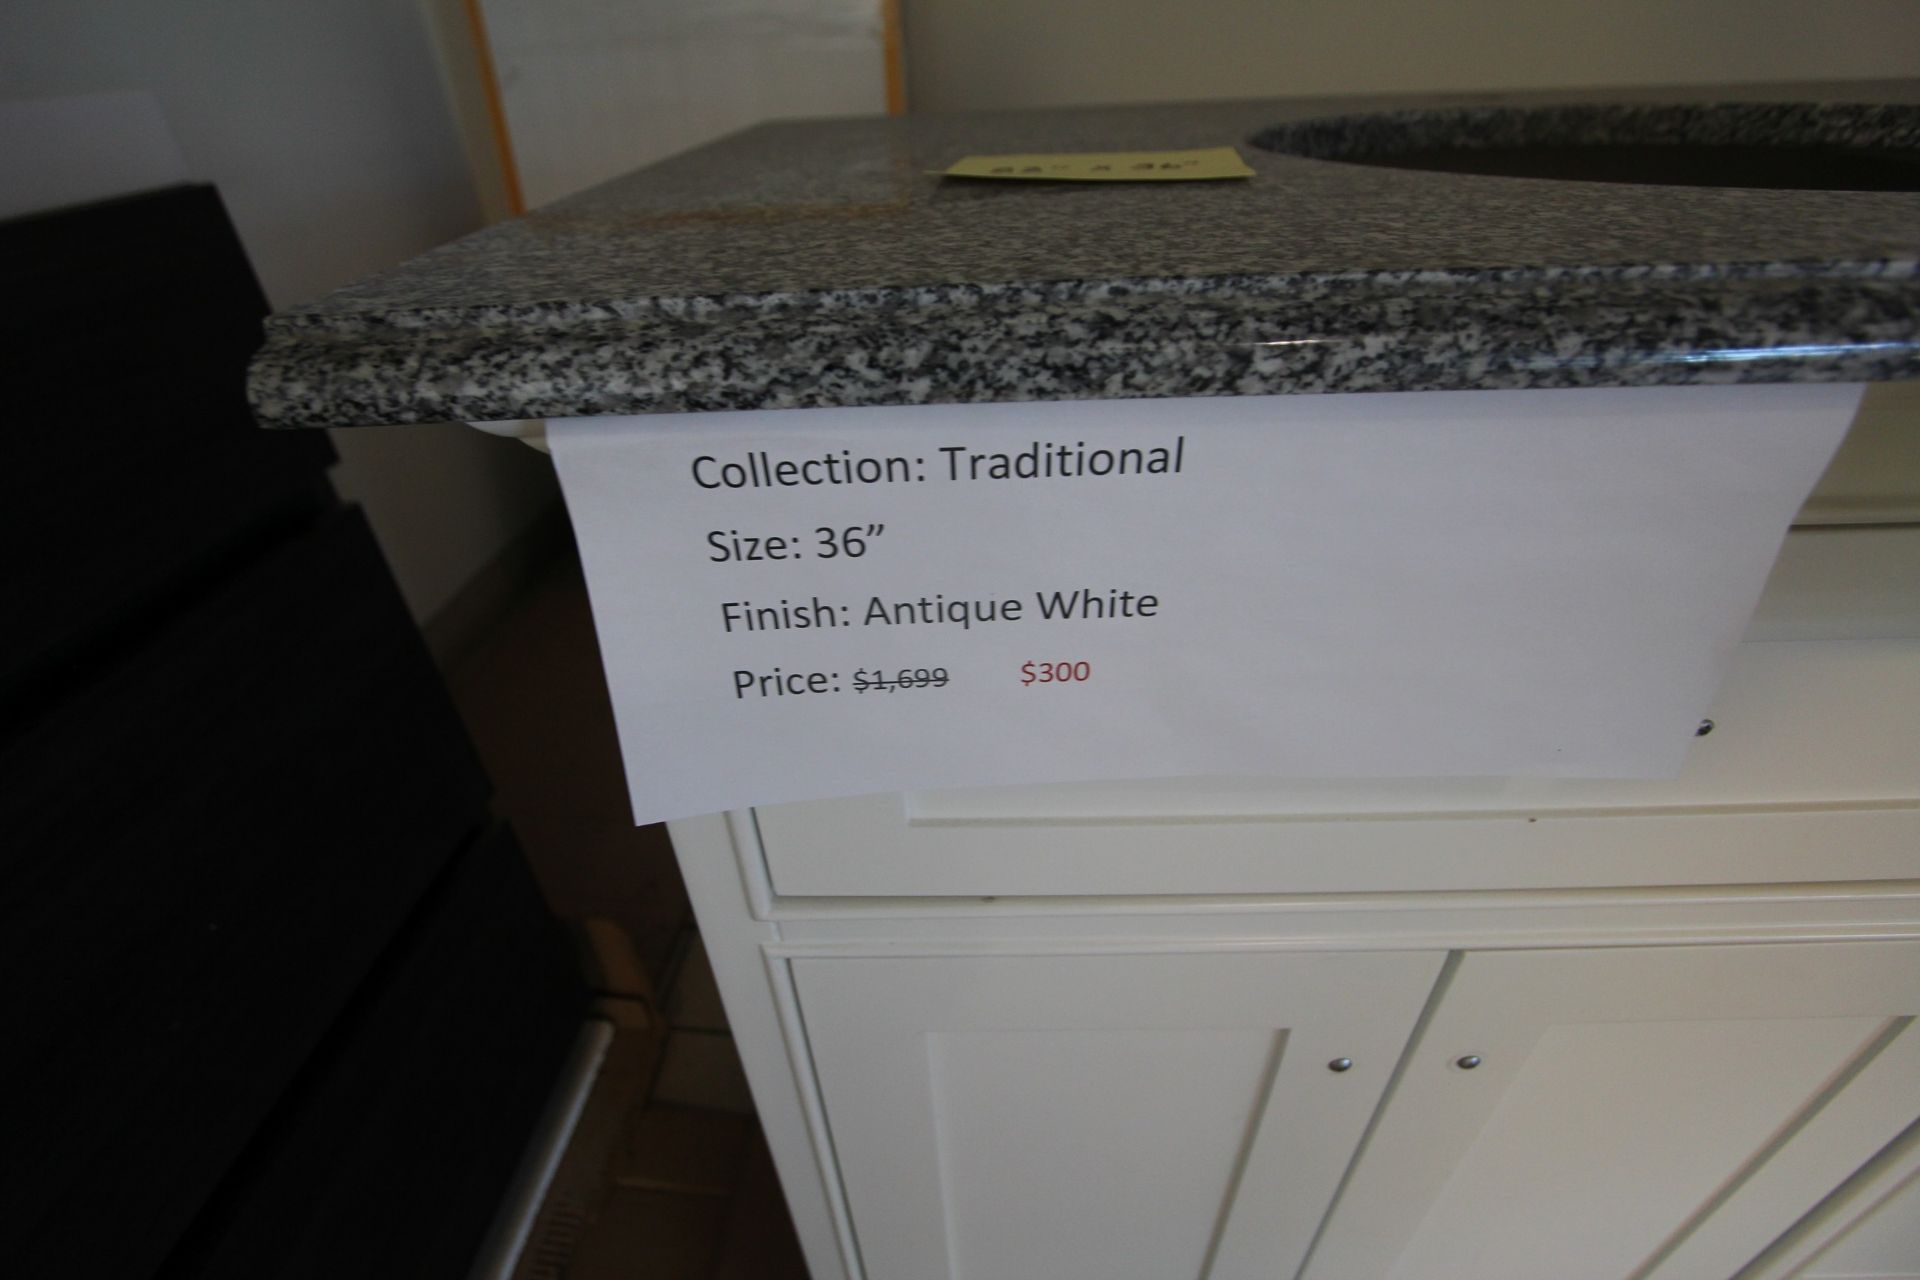 SHOWROOM DISPLAY BATHROOM VANITY W/ CUPBOARDS, 22" X 36", TRADITIONAL COLLECTION, ANTIQUE WHITE - Image 3 of 4